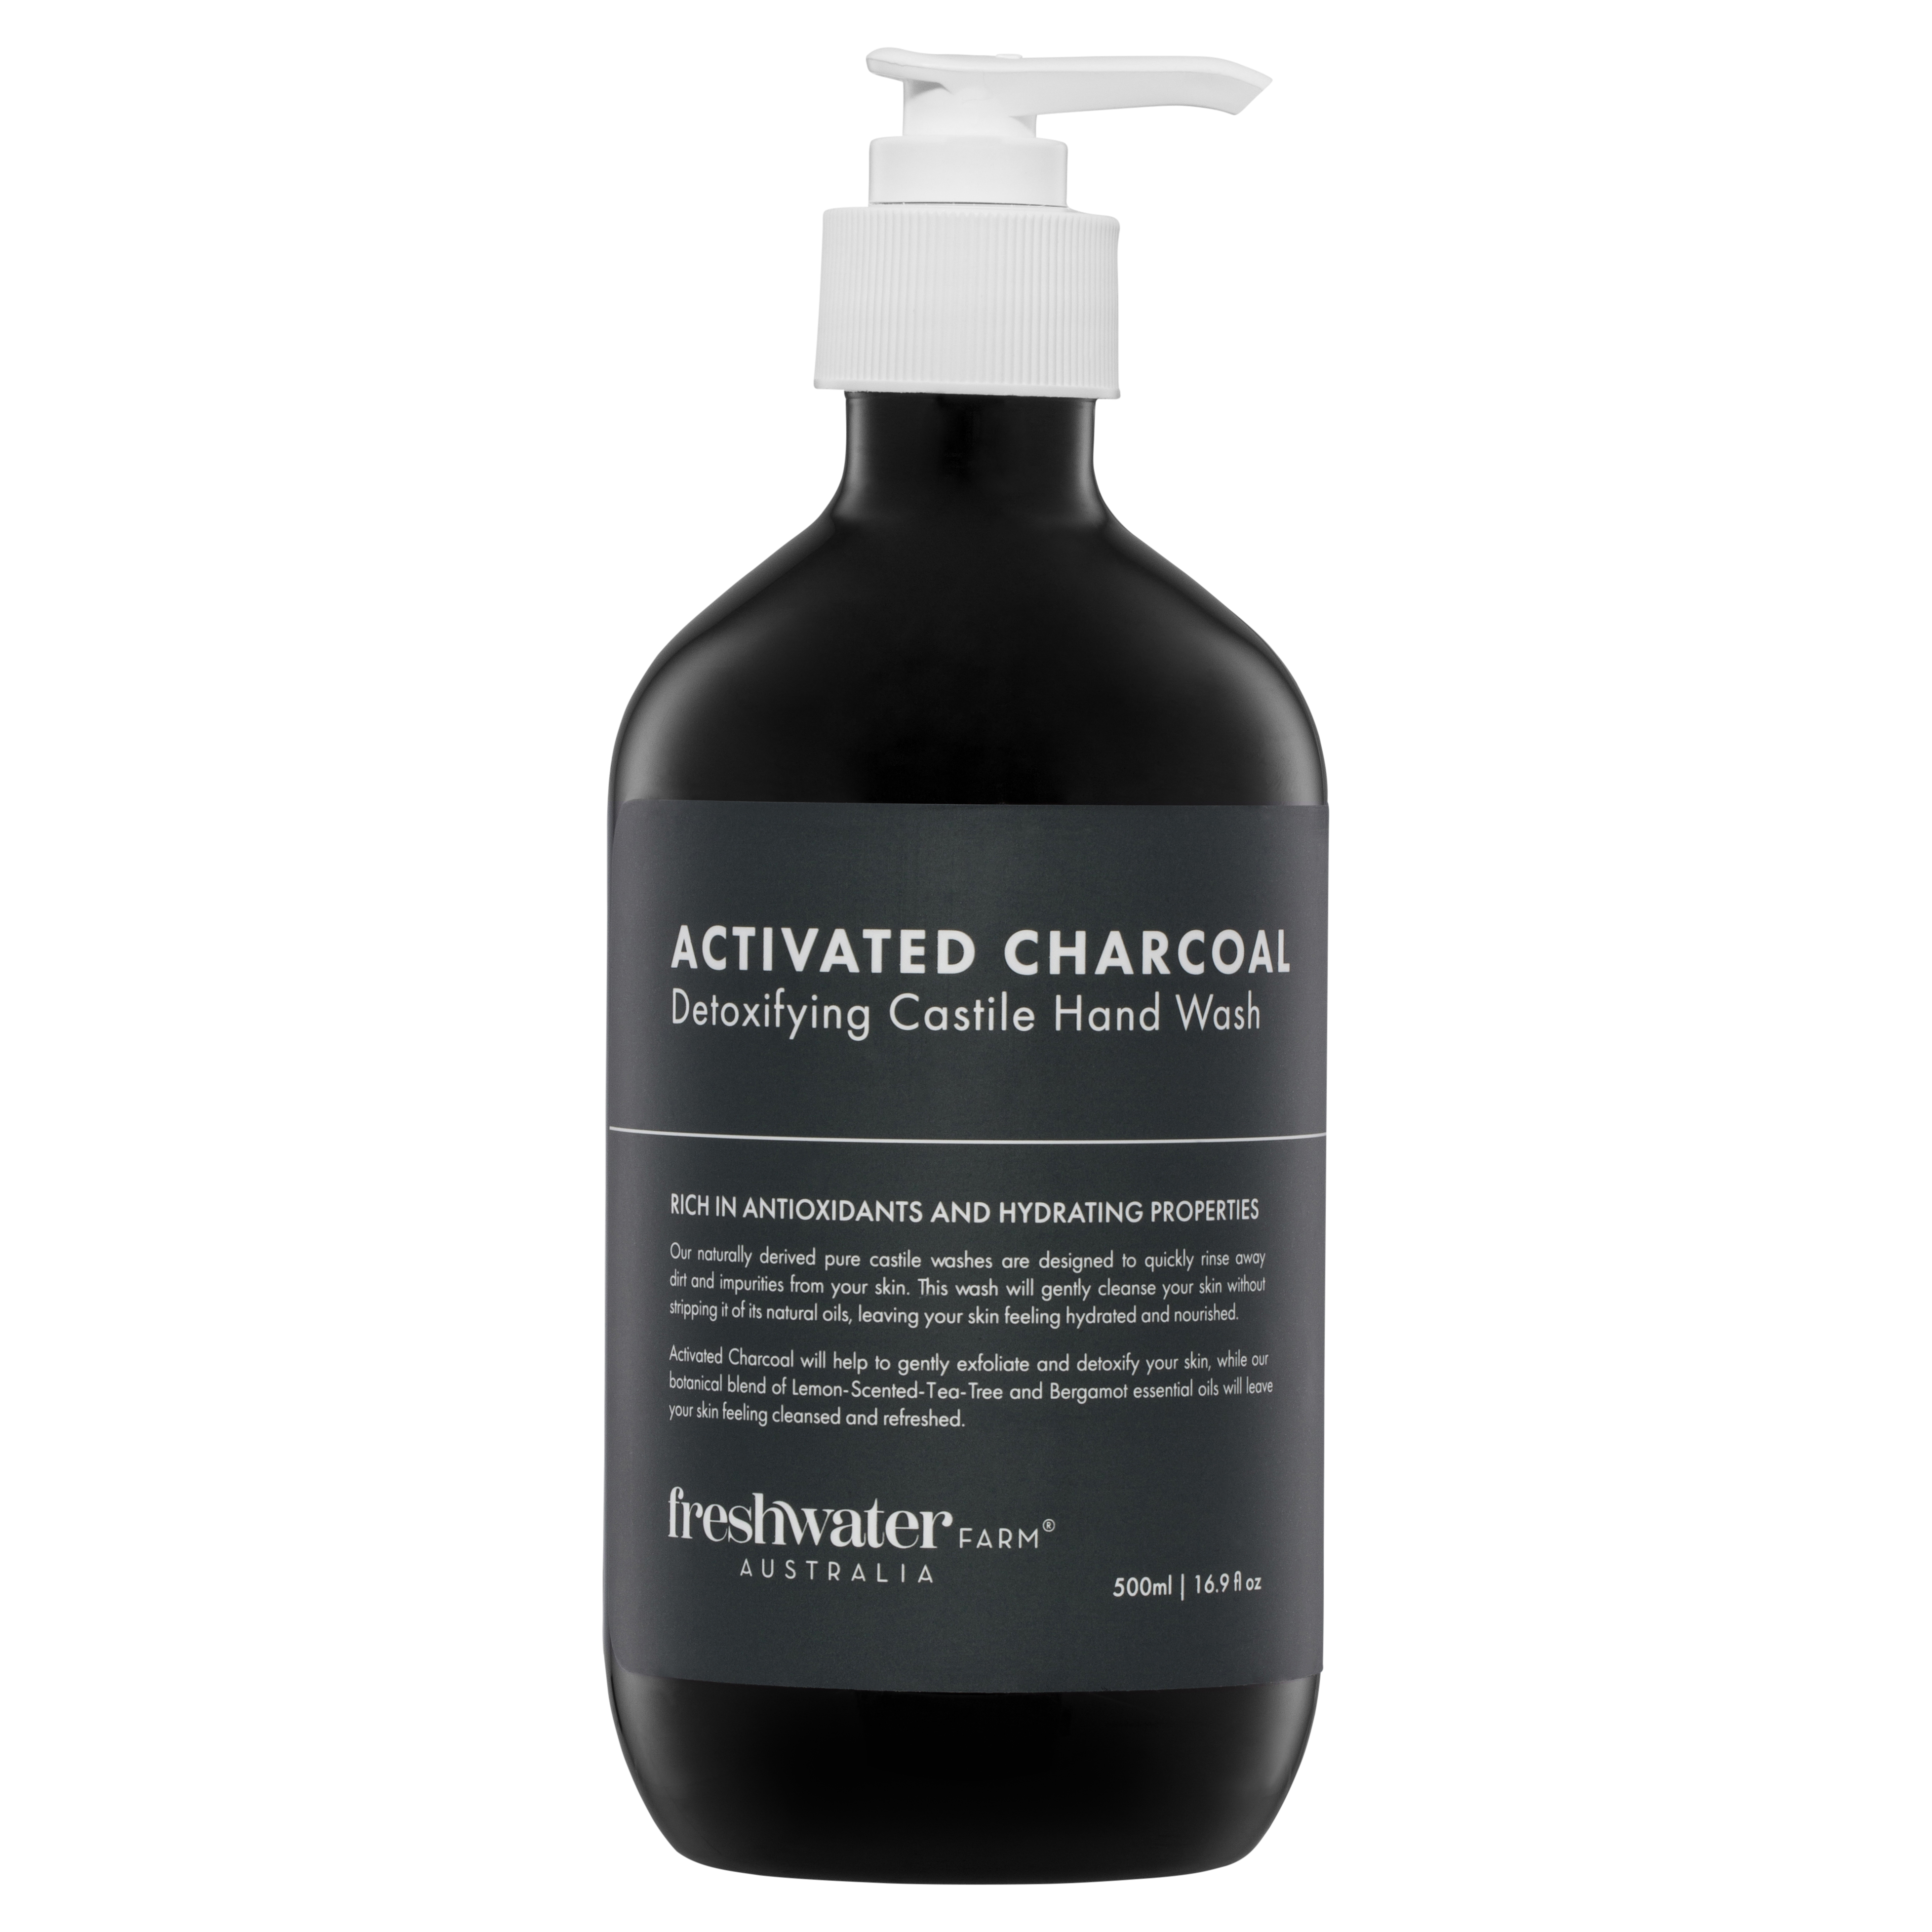 Activated Charcoal, Detoxifying Castile Hand Wash